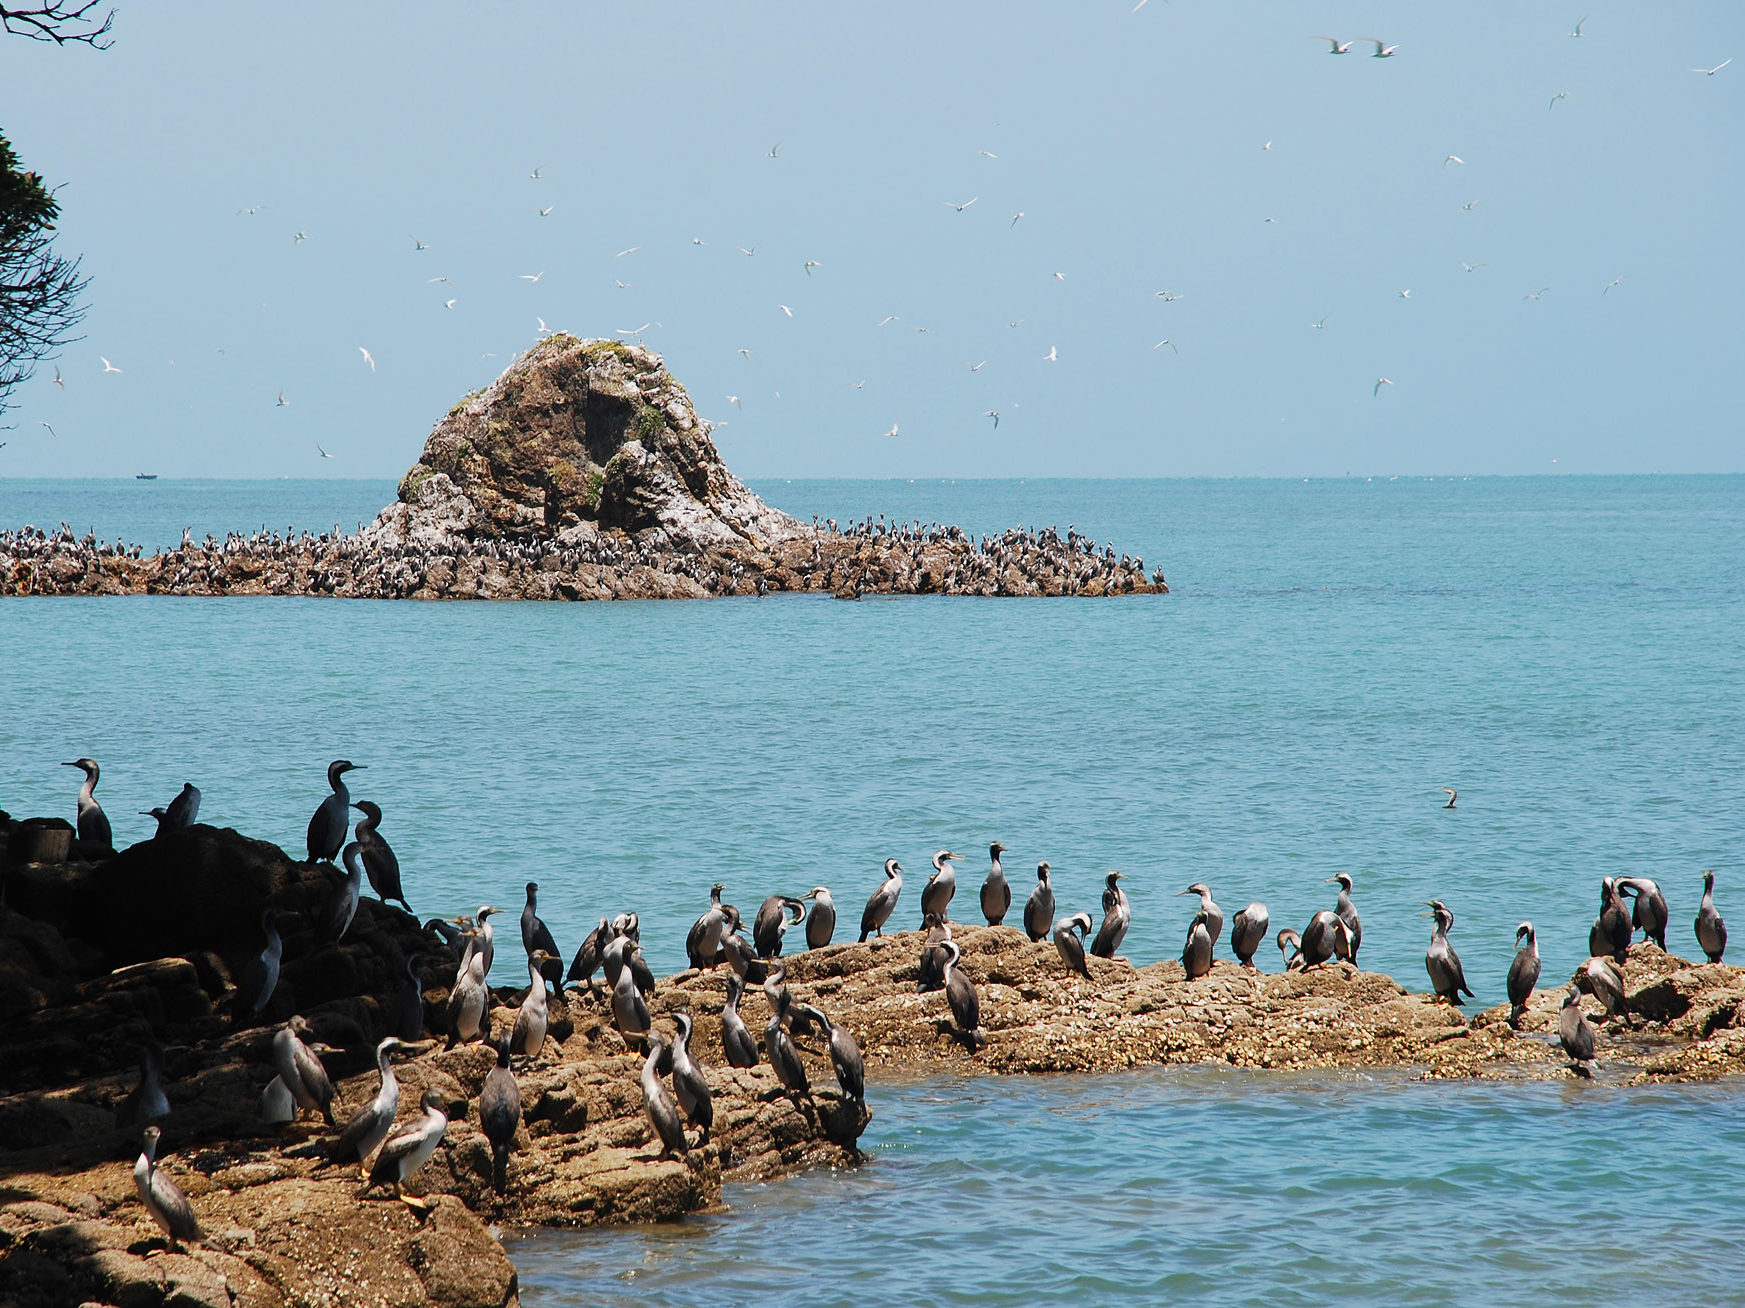 A large group of shags on a rocky outcrop